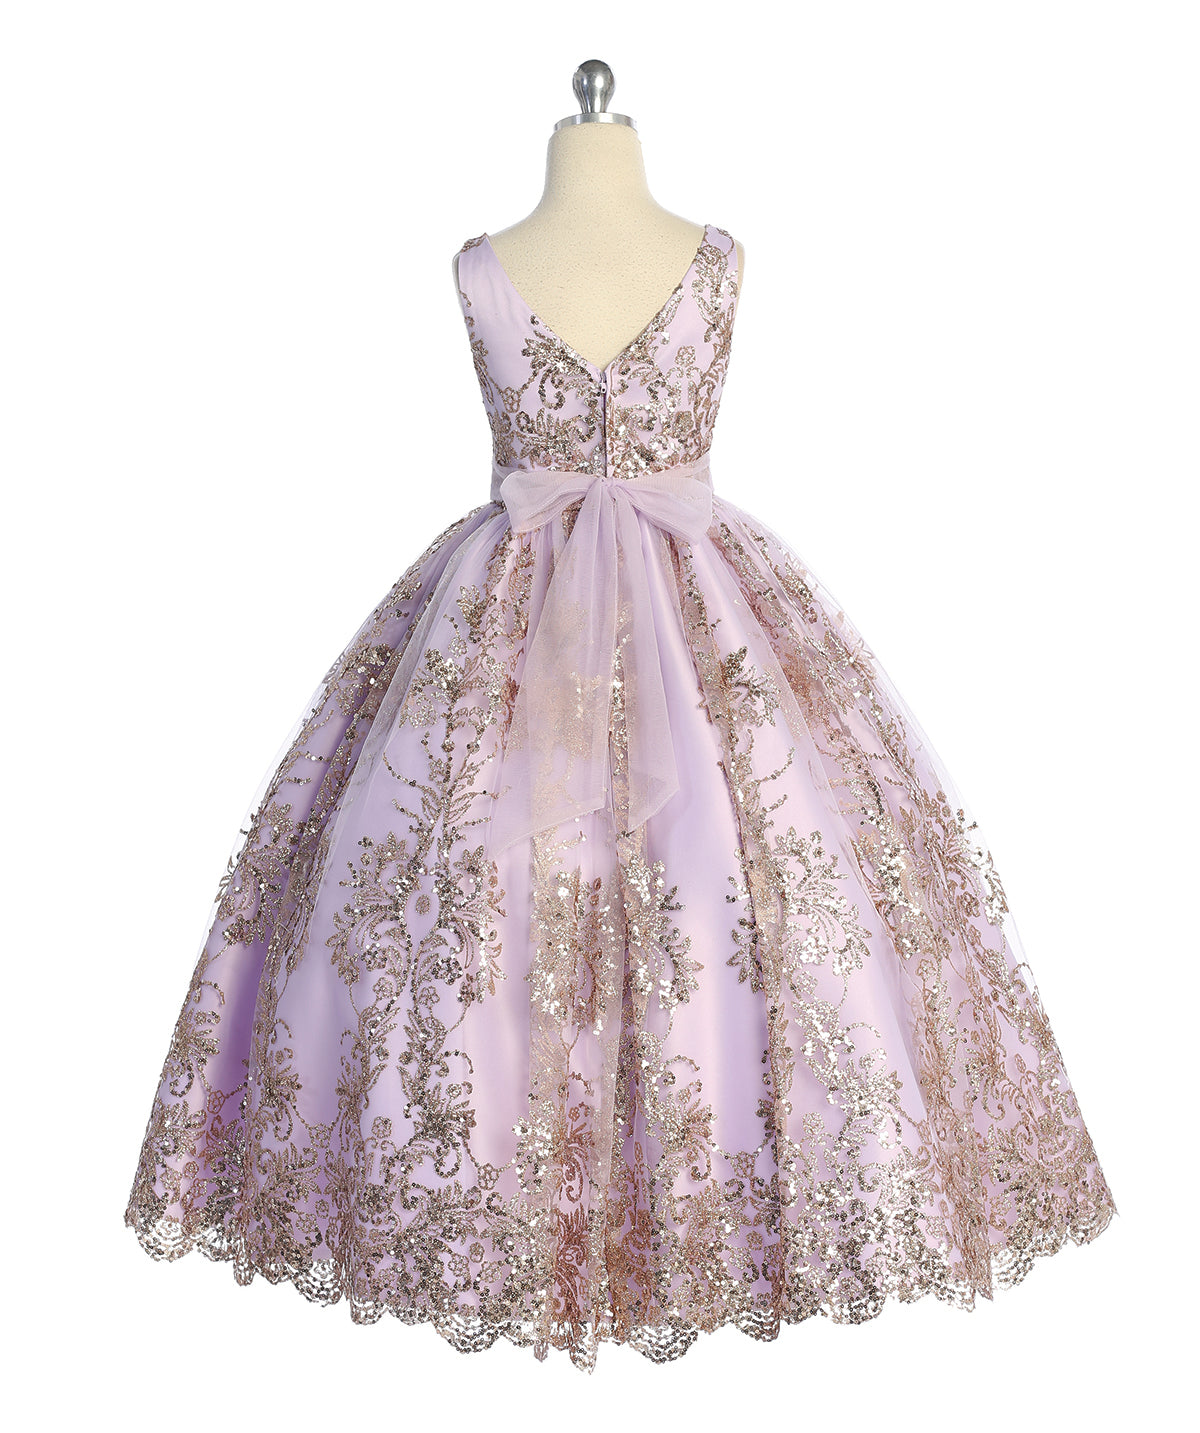 Lilac_1 Girl Dress with Glitter Tulle Overlay Dress - AS7036